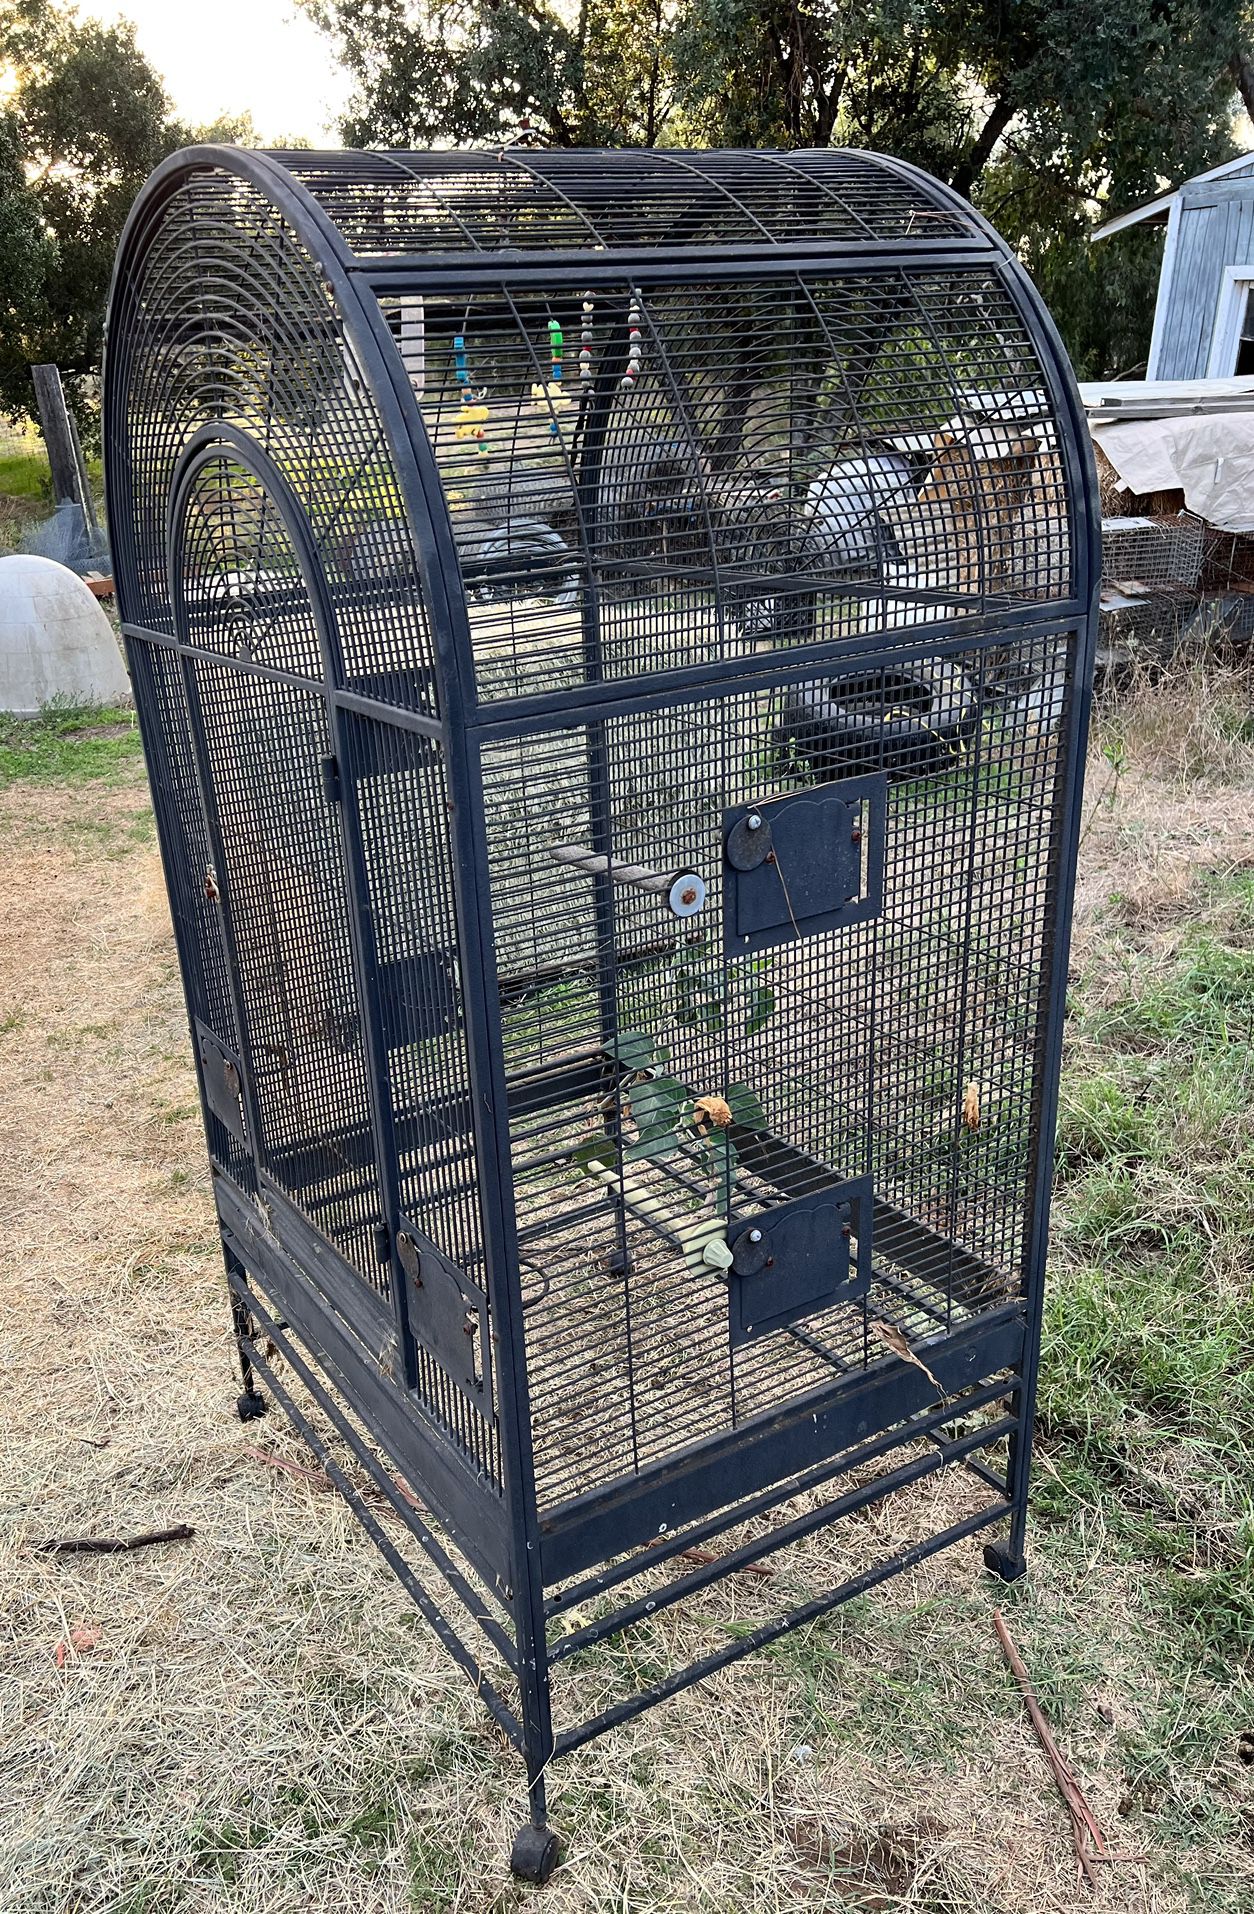 Large  Bird Cages Various Sizes $50 